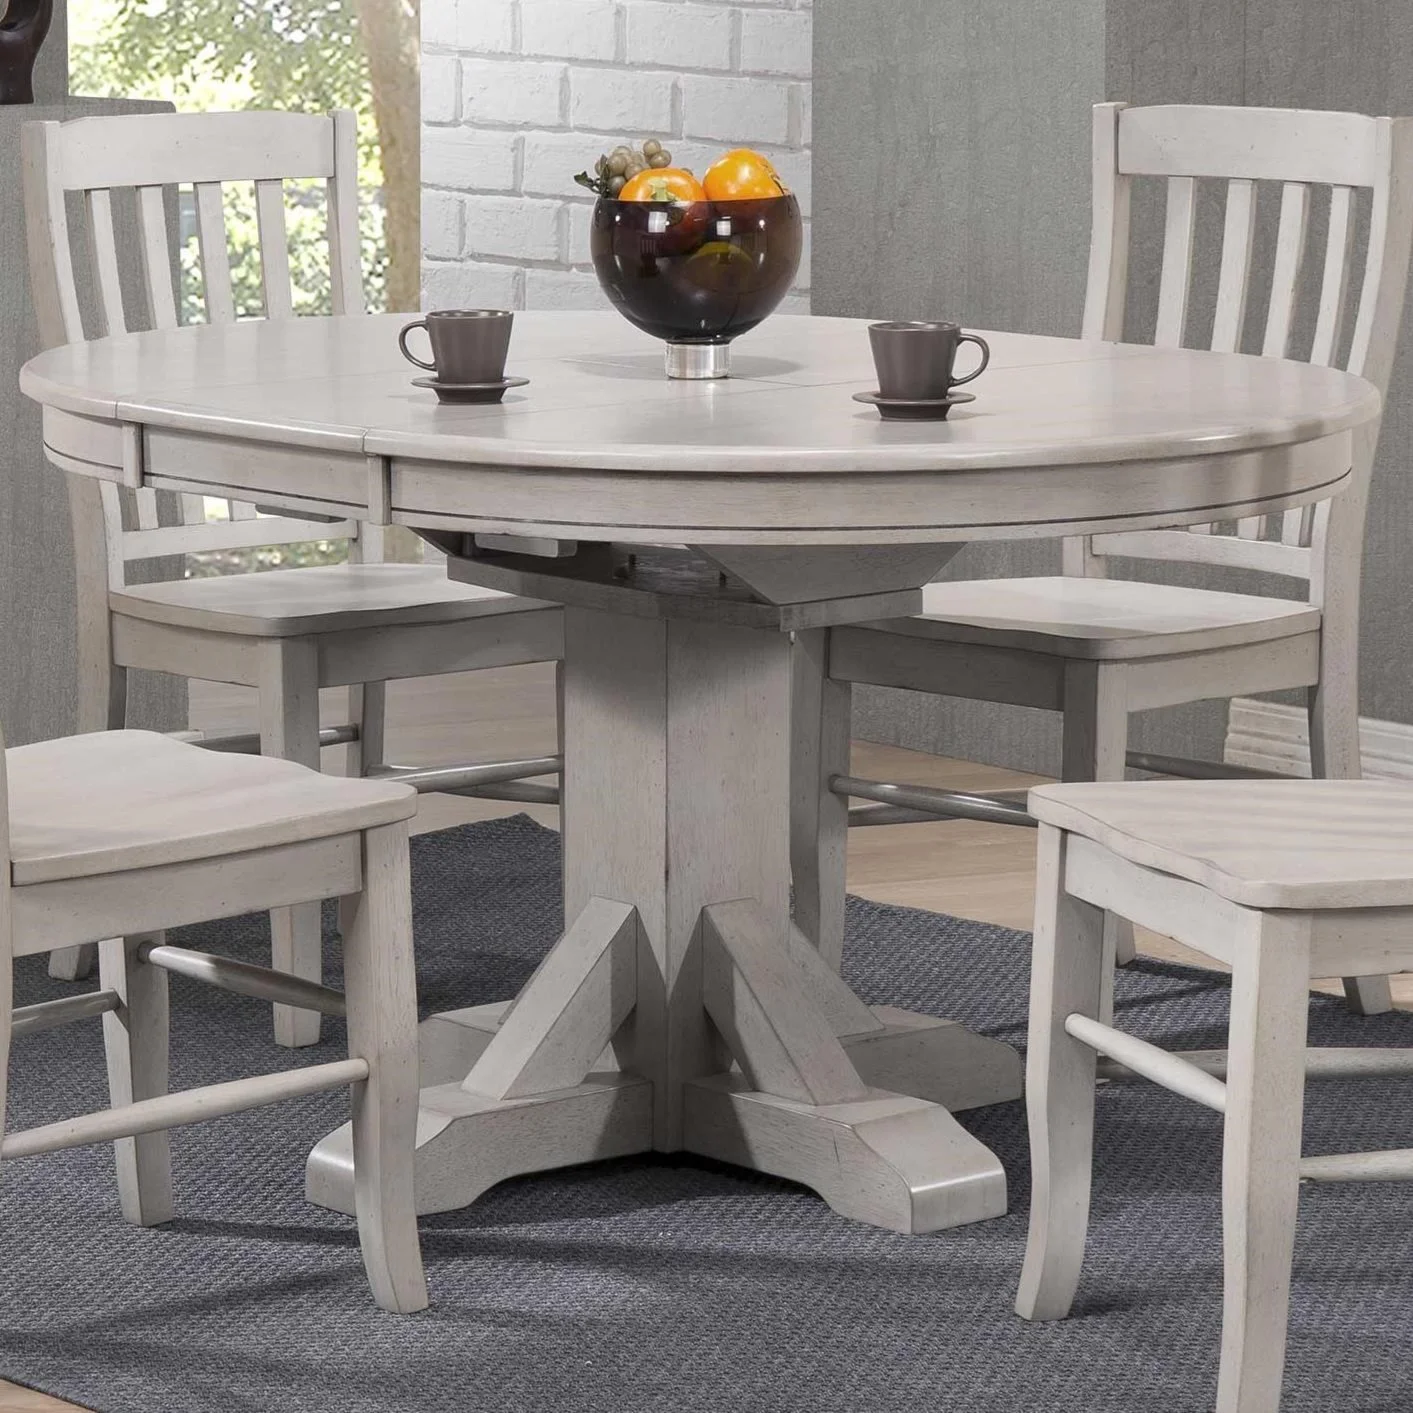 Rustic Butterfly Leaf Table Sets, Self Storing Leafs